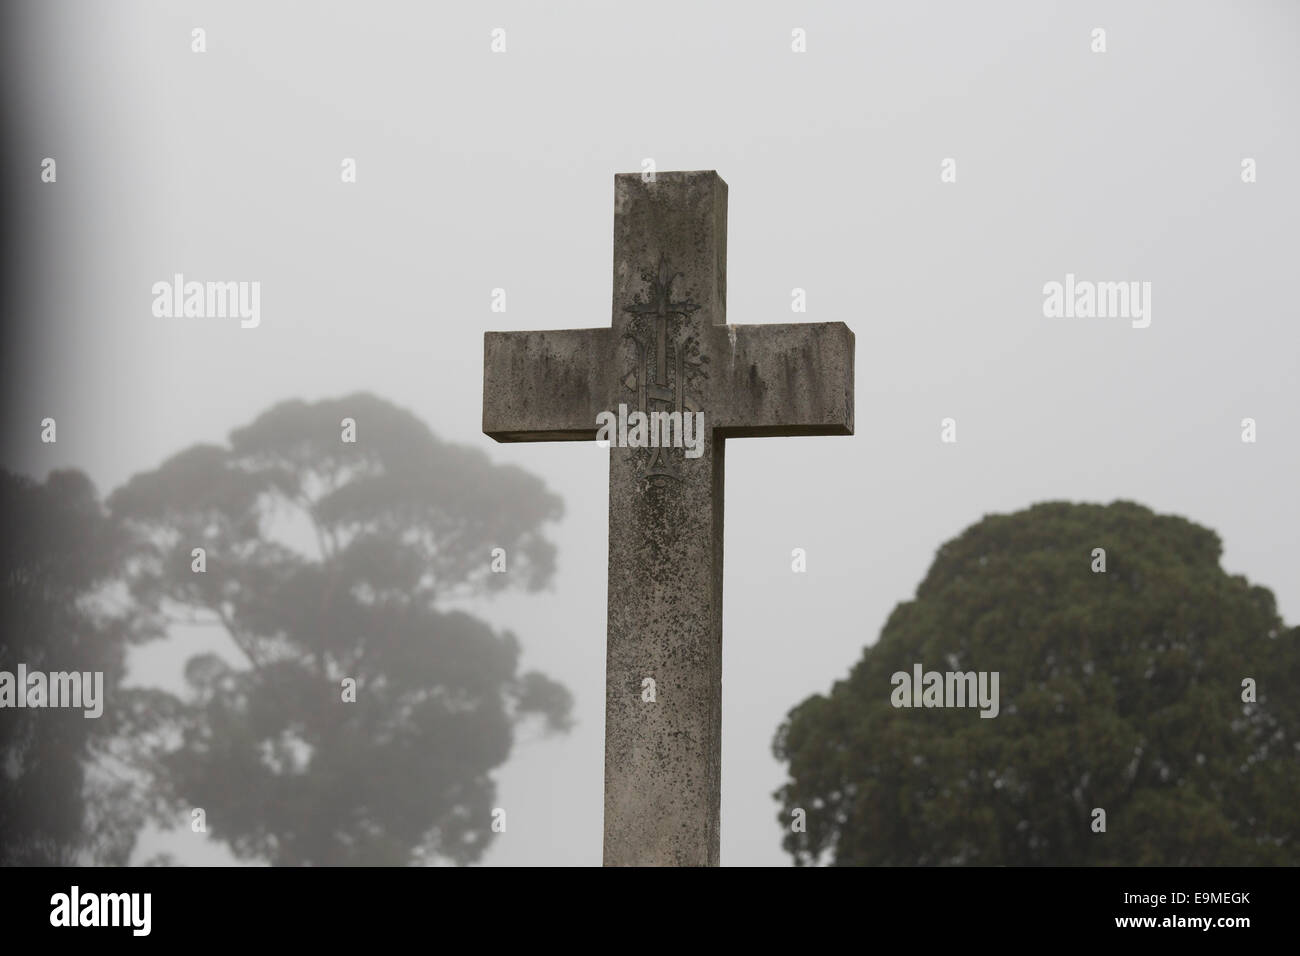 Cross at cemetery against clear sky, Melbourne, Victoria, Australia Stock Photo